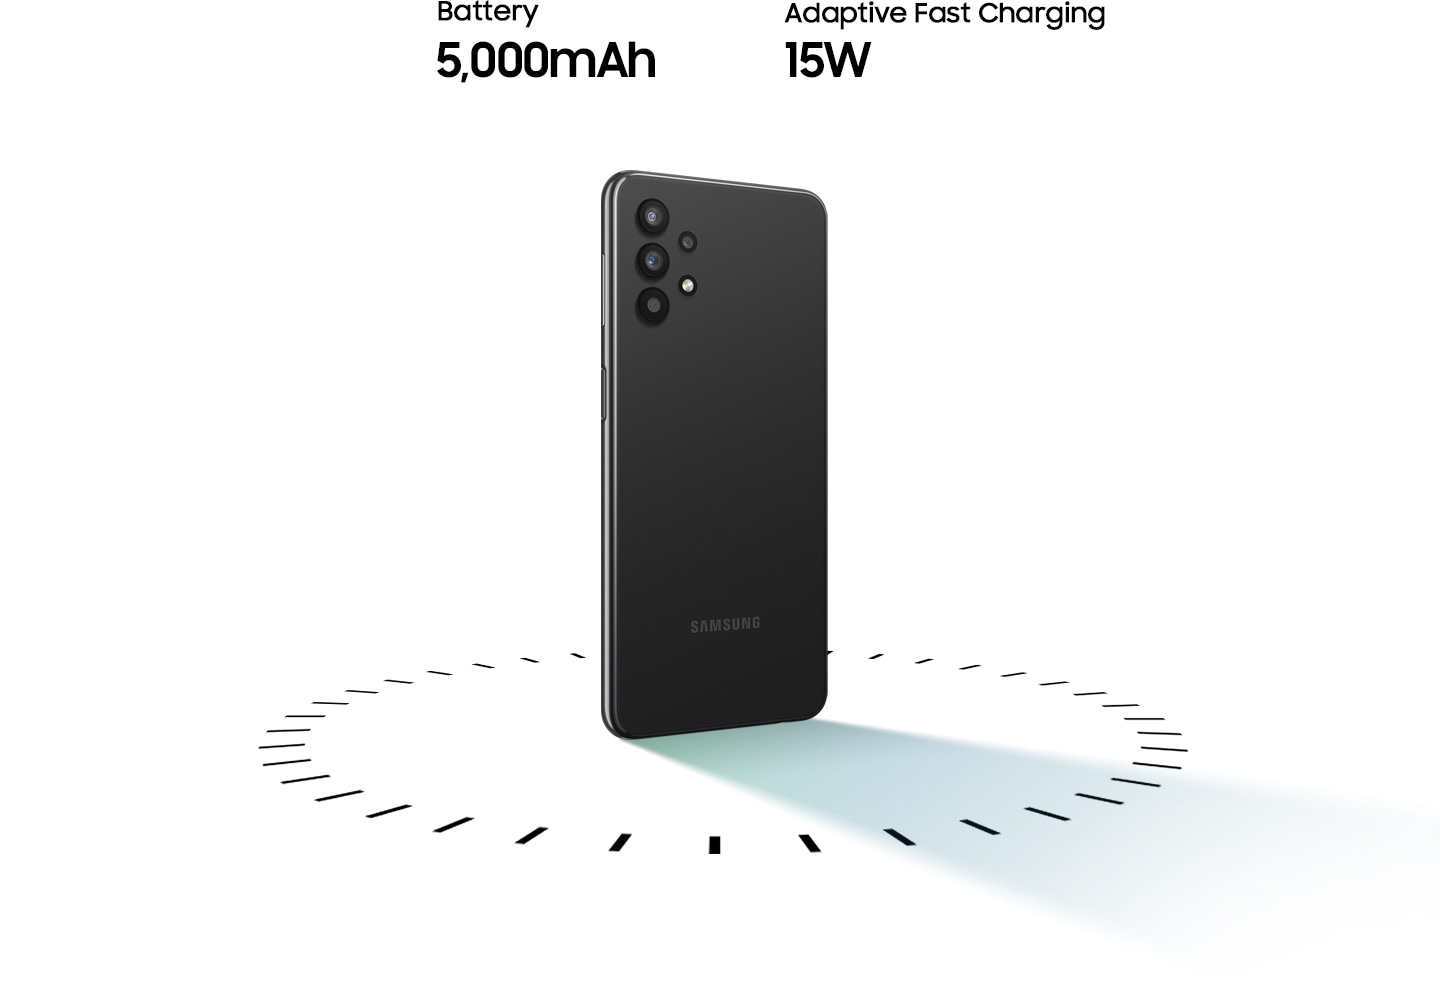 Galaxy A32 5G stands up, surrounded by circular dots, with the text of 5,000mAh Battery and 15W Adaptive Fast charging.